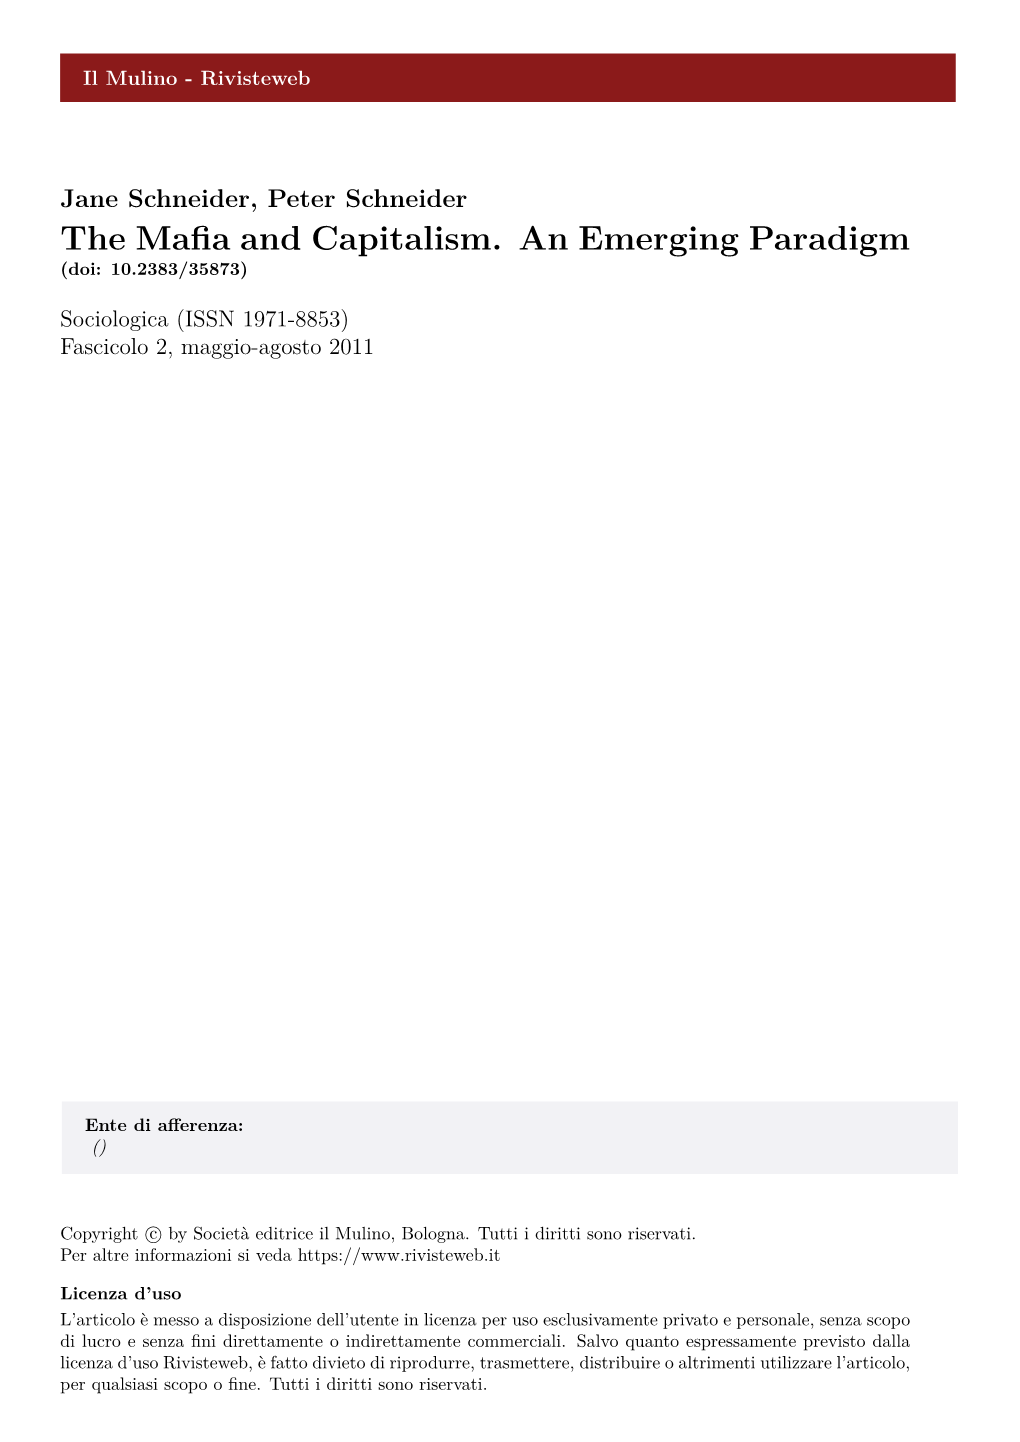 The Mafia and Capitalism an Emerging Paradigm by Jane Schneider and Peter Schneider Doi: 10.2383/35873